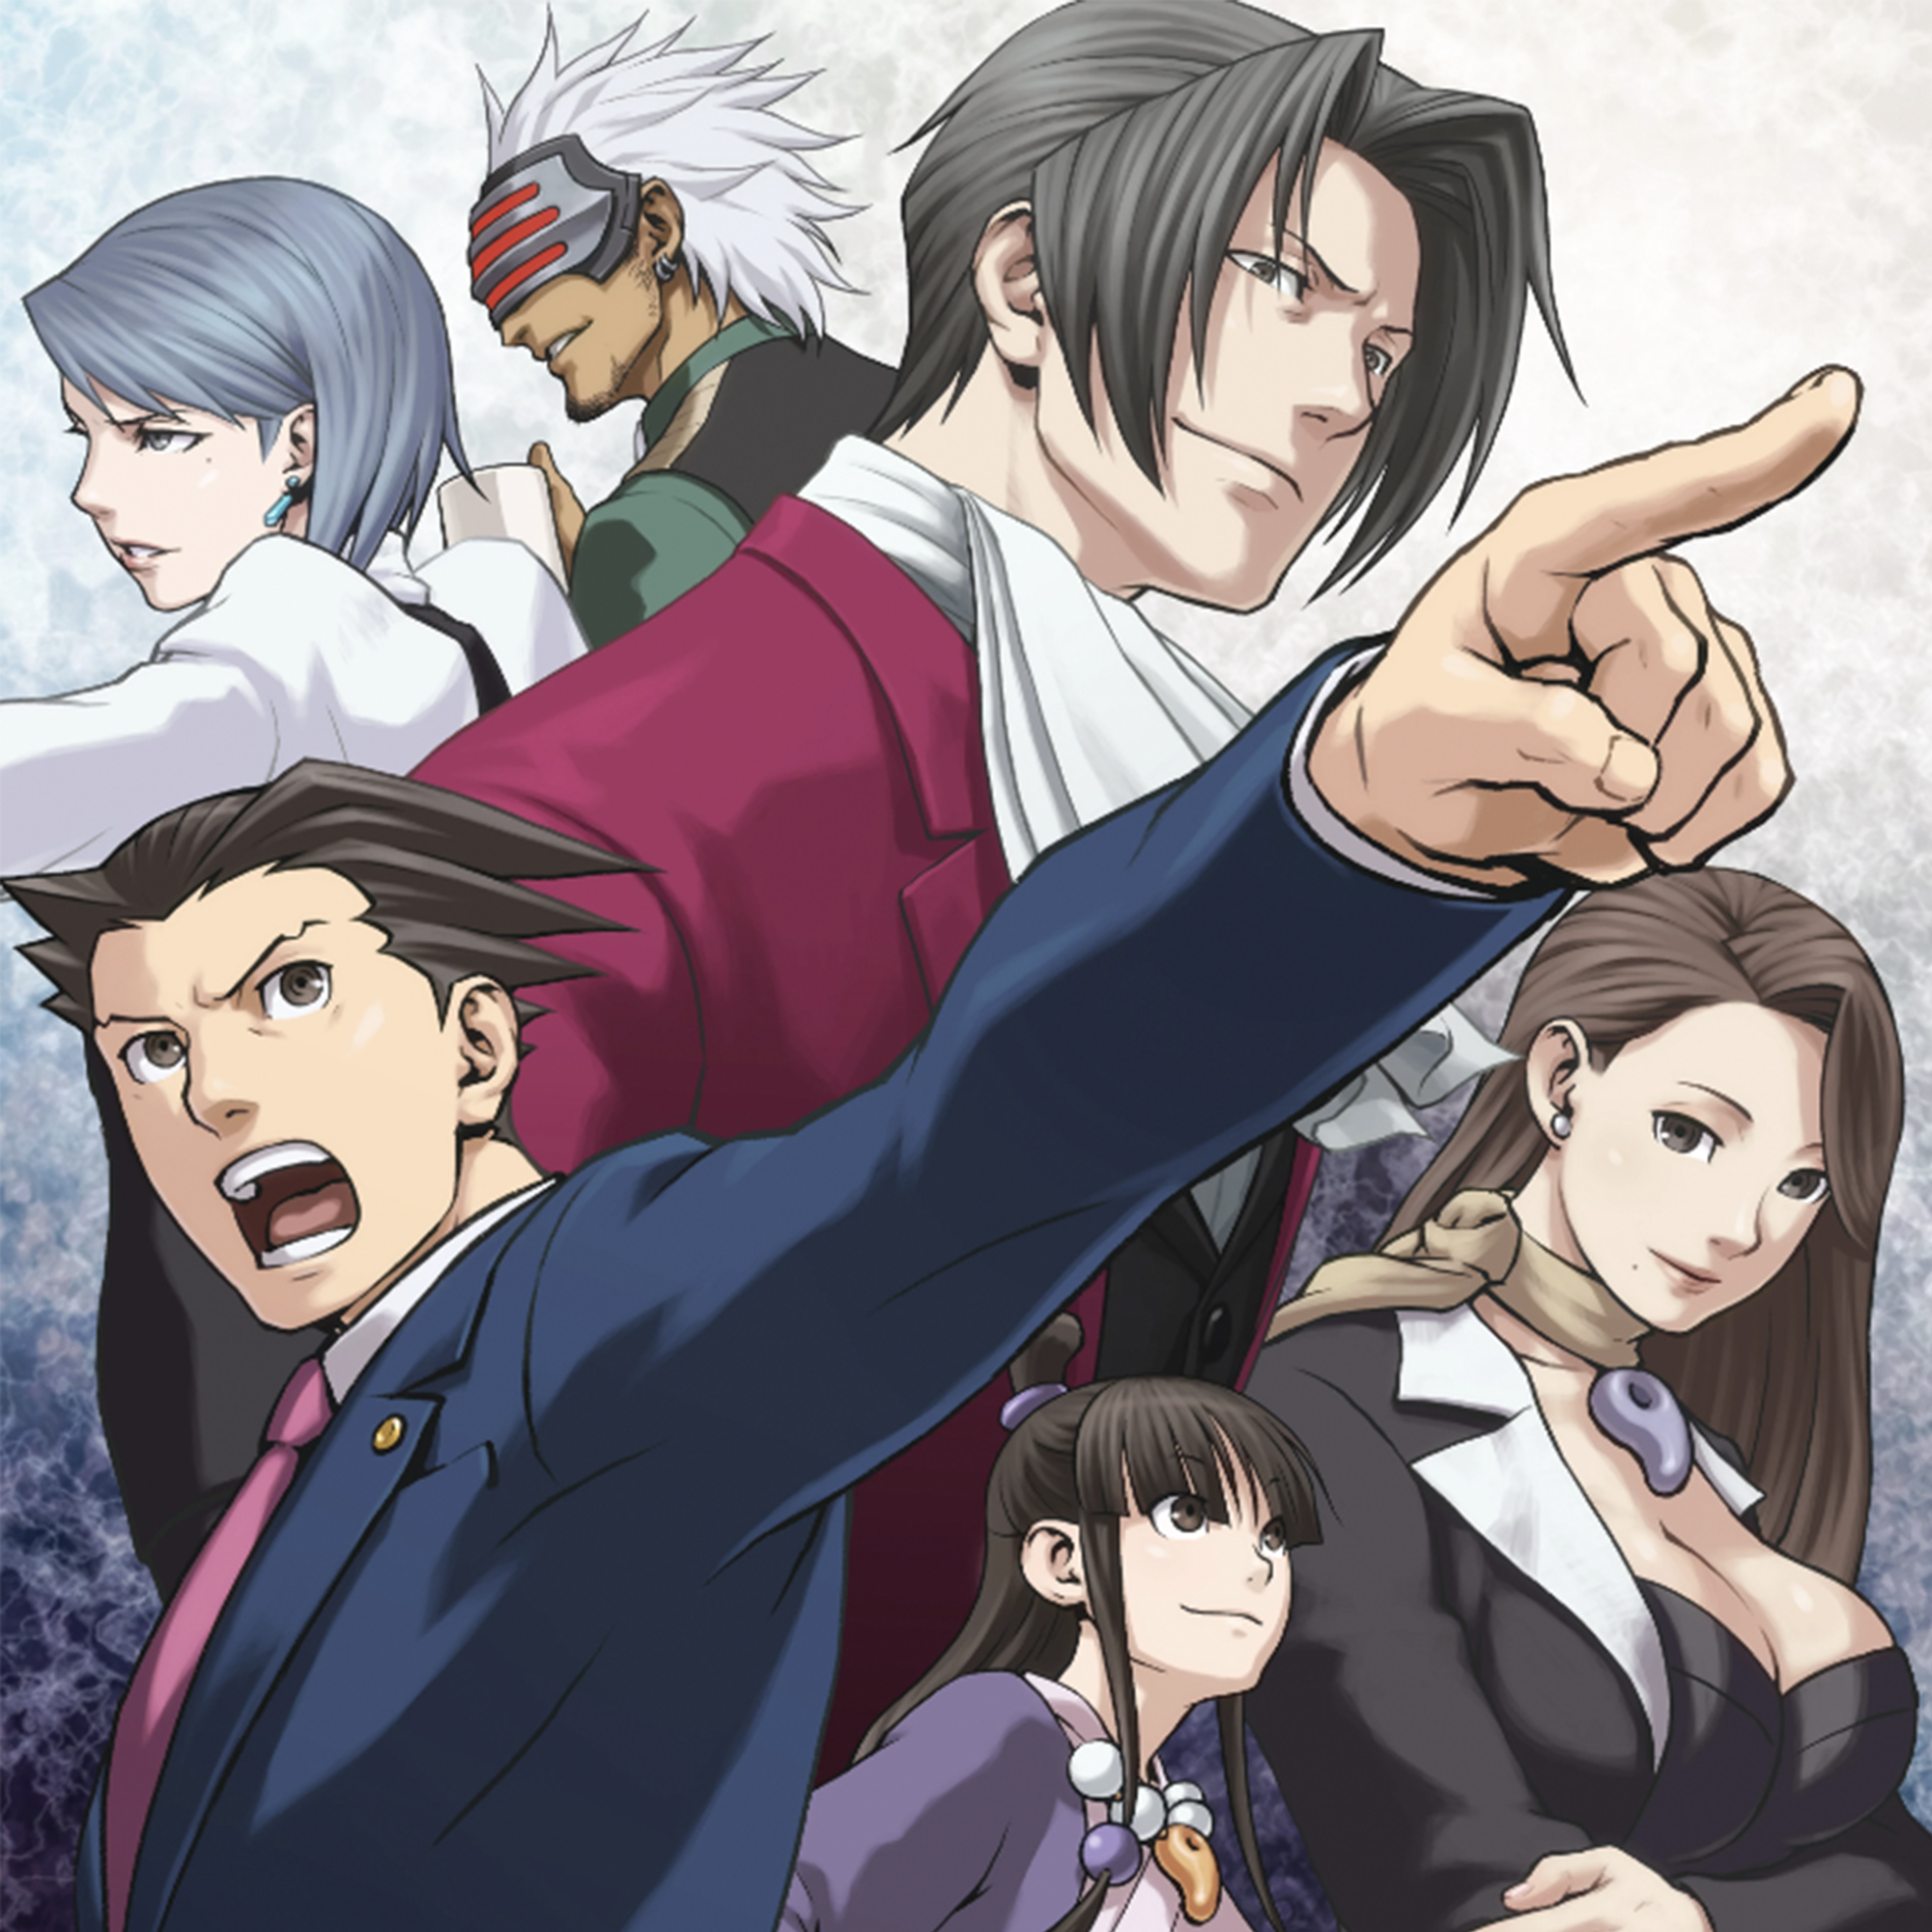 Ace Attorney - Phoenix Wright's friendships and relationships